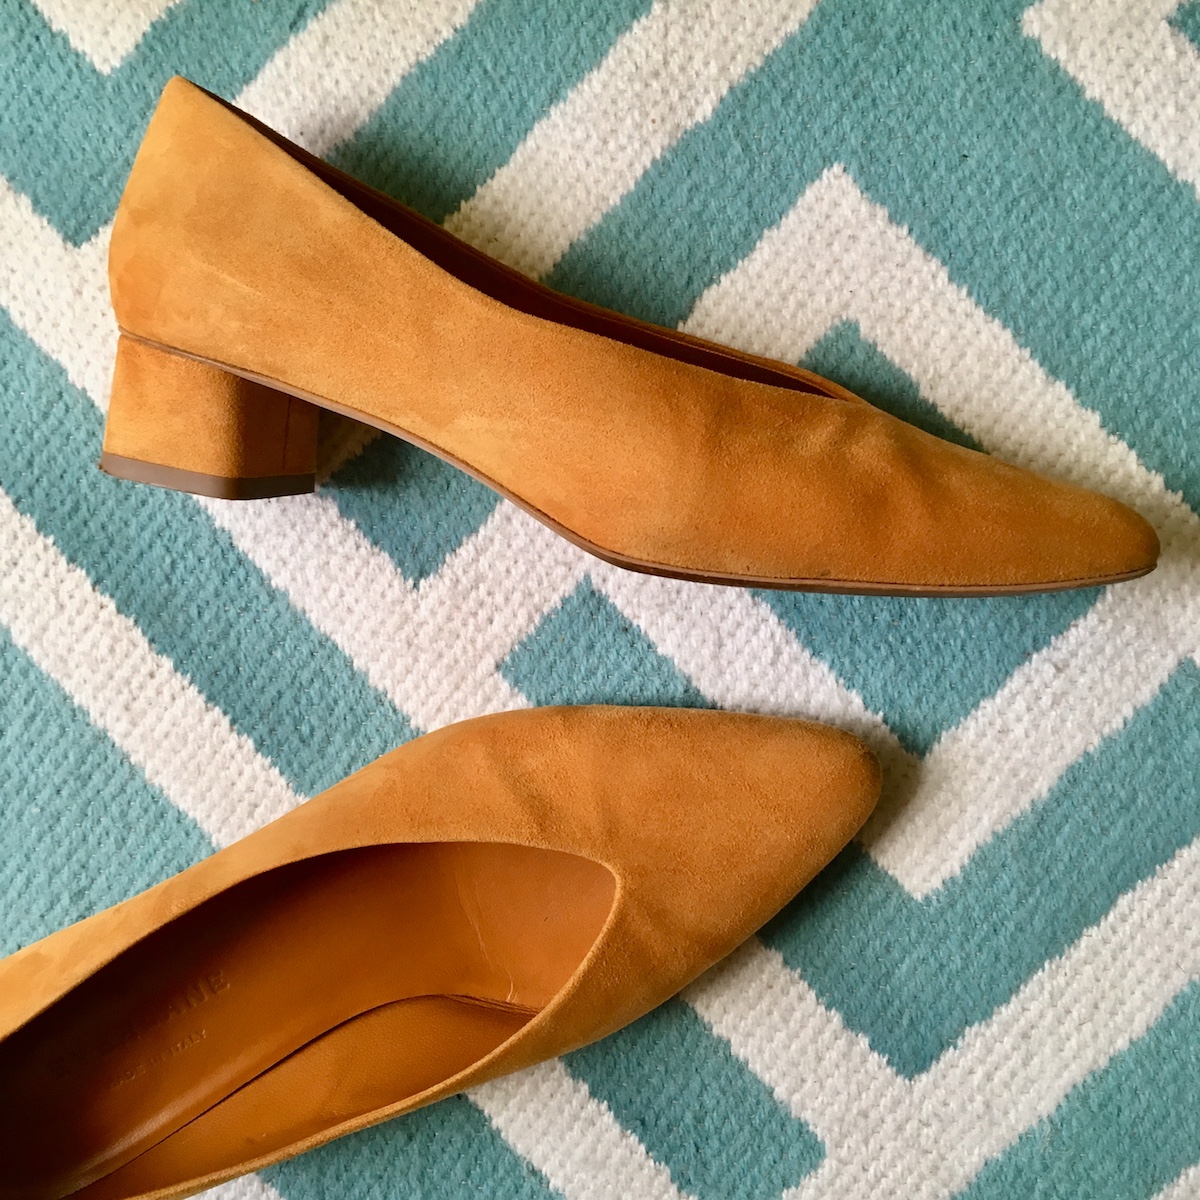 A pair of mustard colored suede Everlane V heels lay on a blue and white rug.